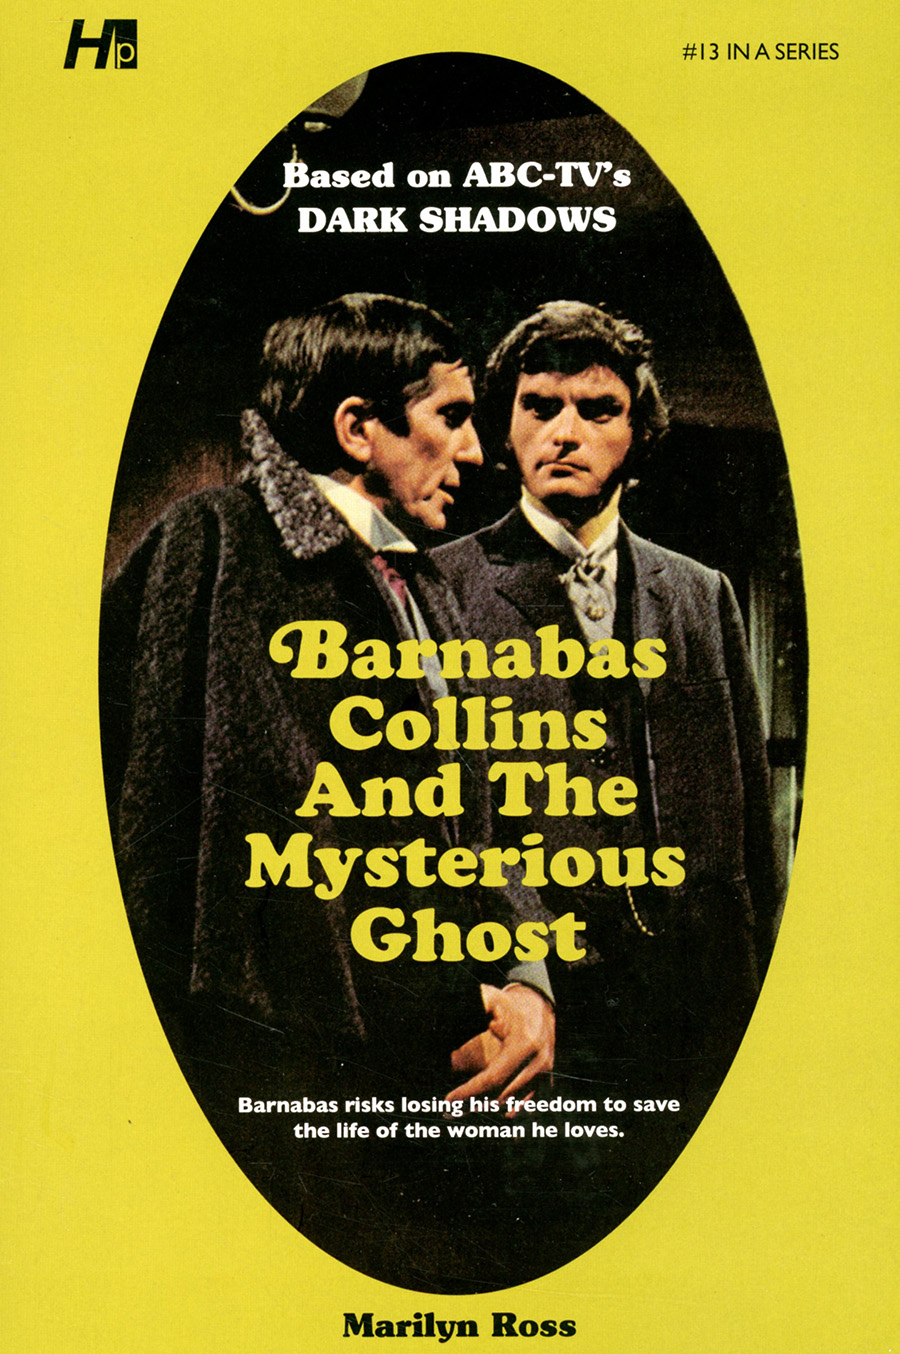 Dark Shadows Paperback Library Novel Vol 13 Barnabas Collins And The Mysterious Ghost TP